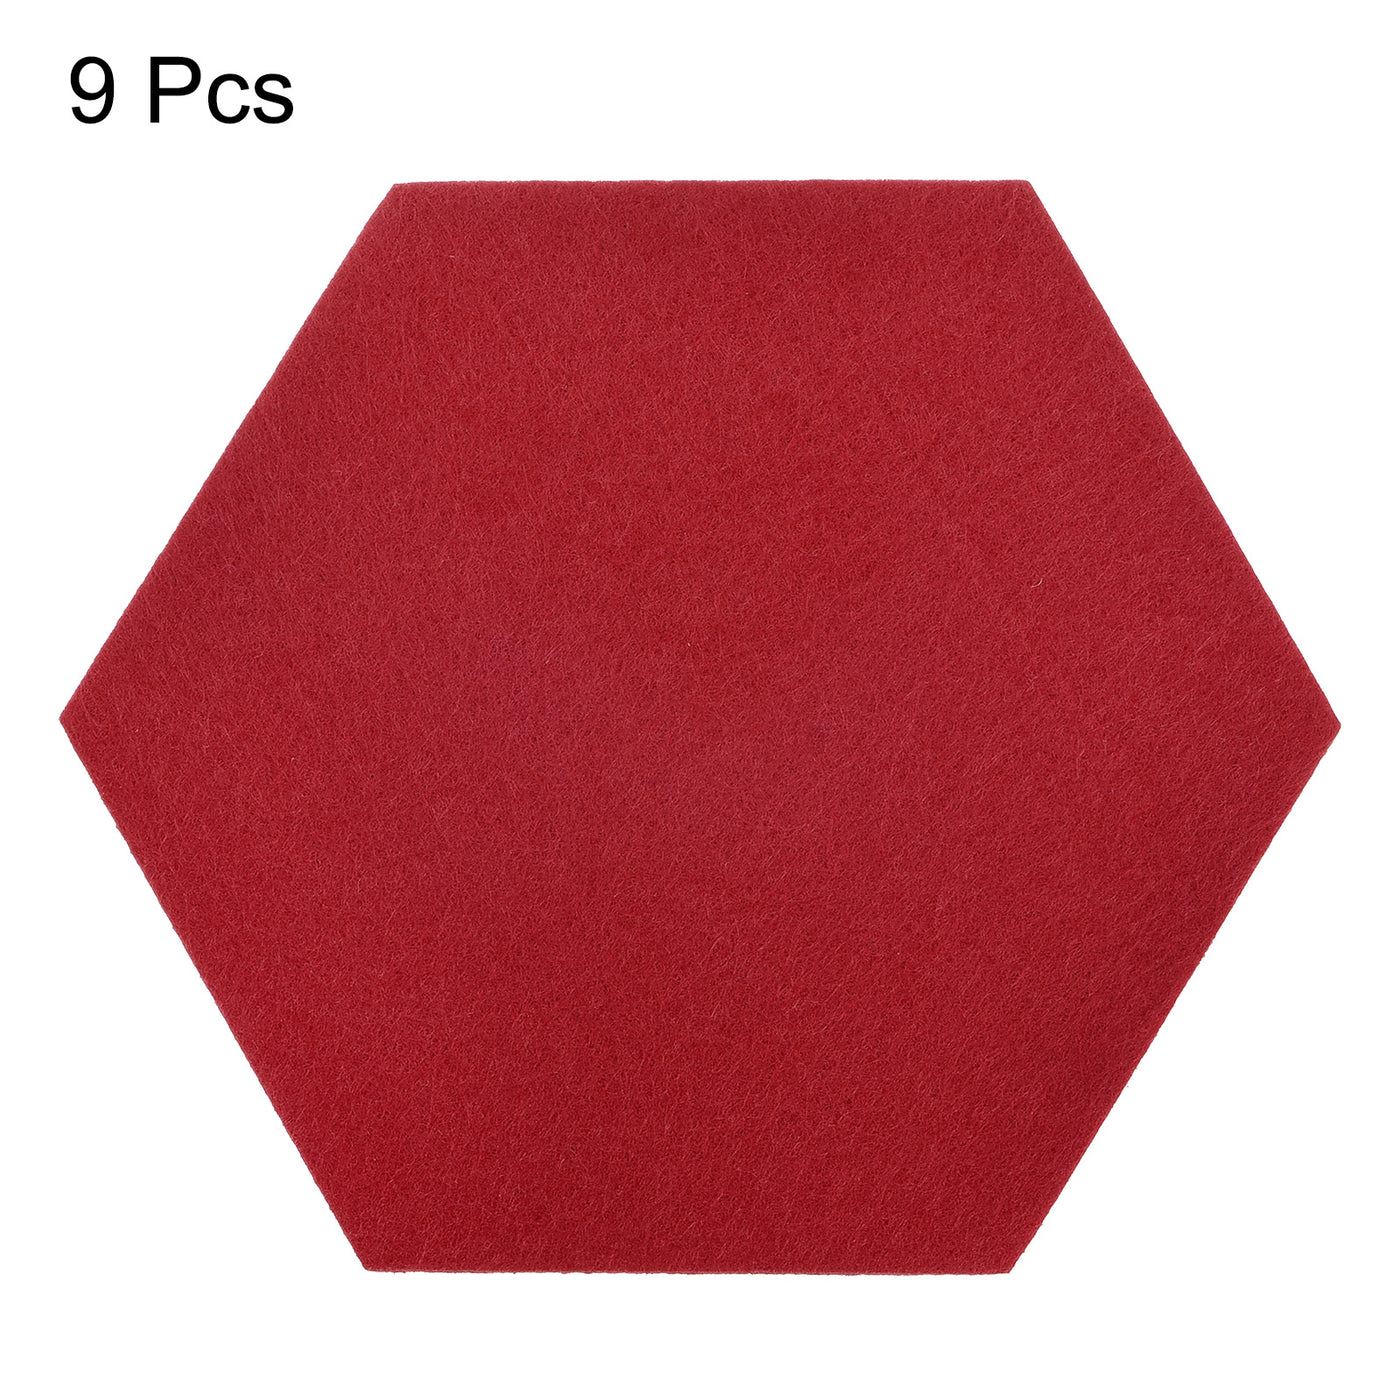 uxcell Uxcell Felt Coasters 9pcs Absorbent Pad Coaster for Drink Cup Pot Bowl Vase Red